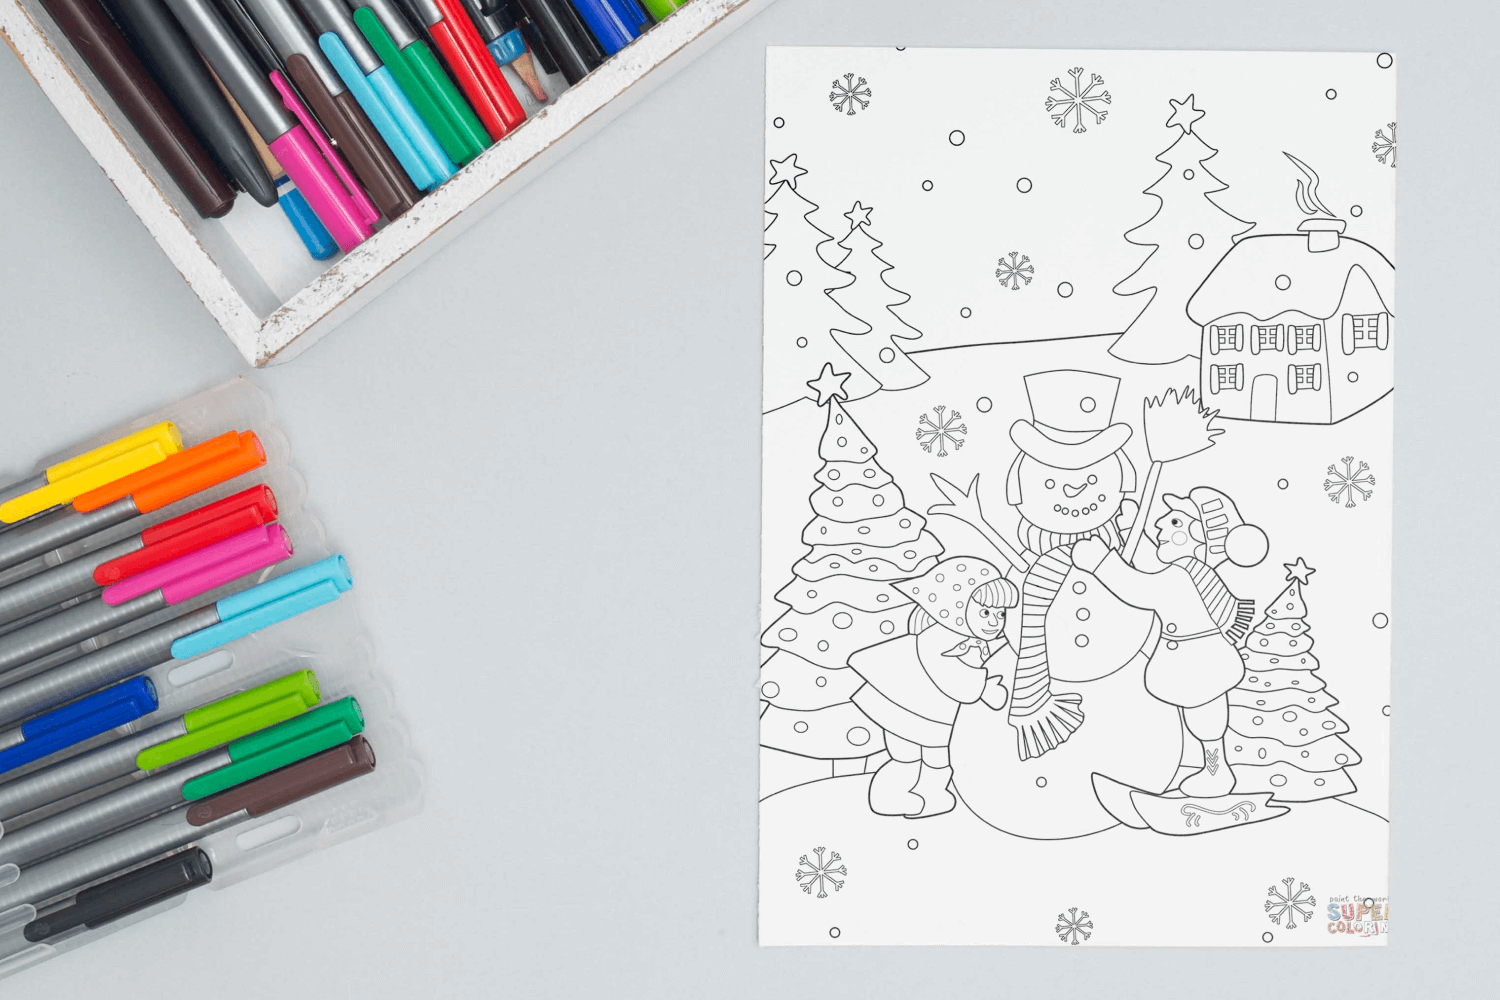 Boy and Girl Building a Snowman coloring page facebook image.